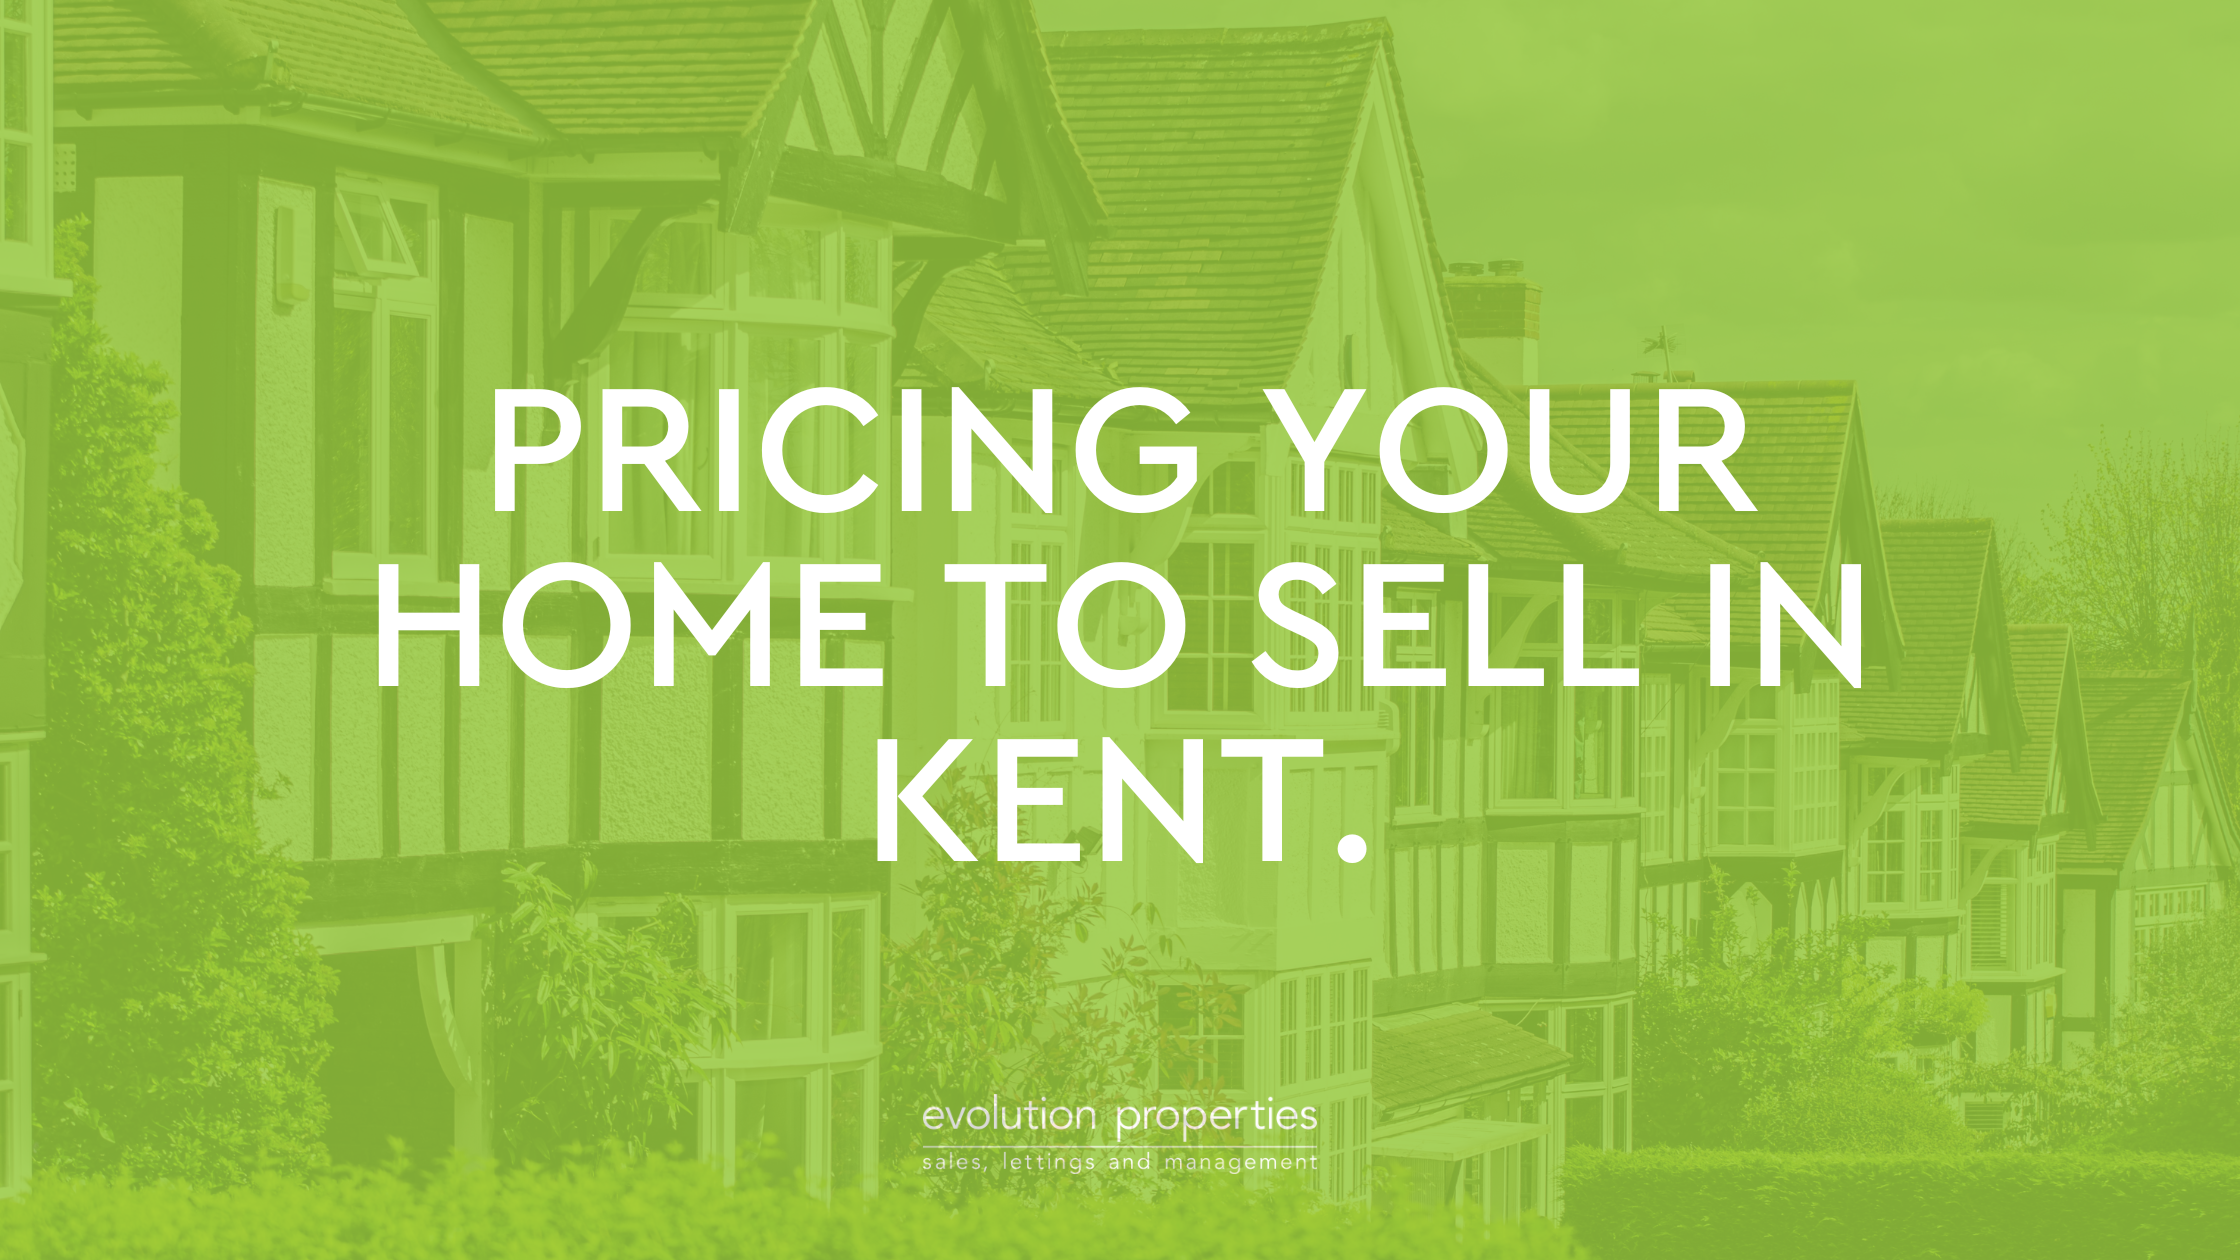 Pricing your home to sell in Kent